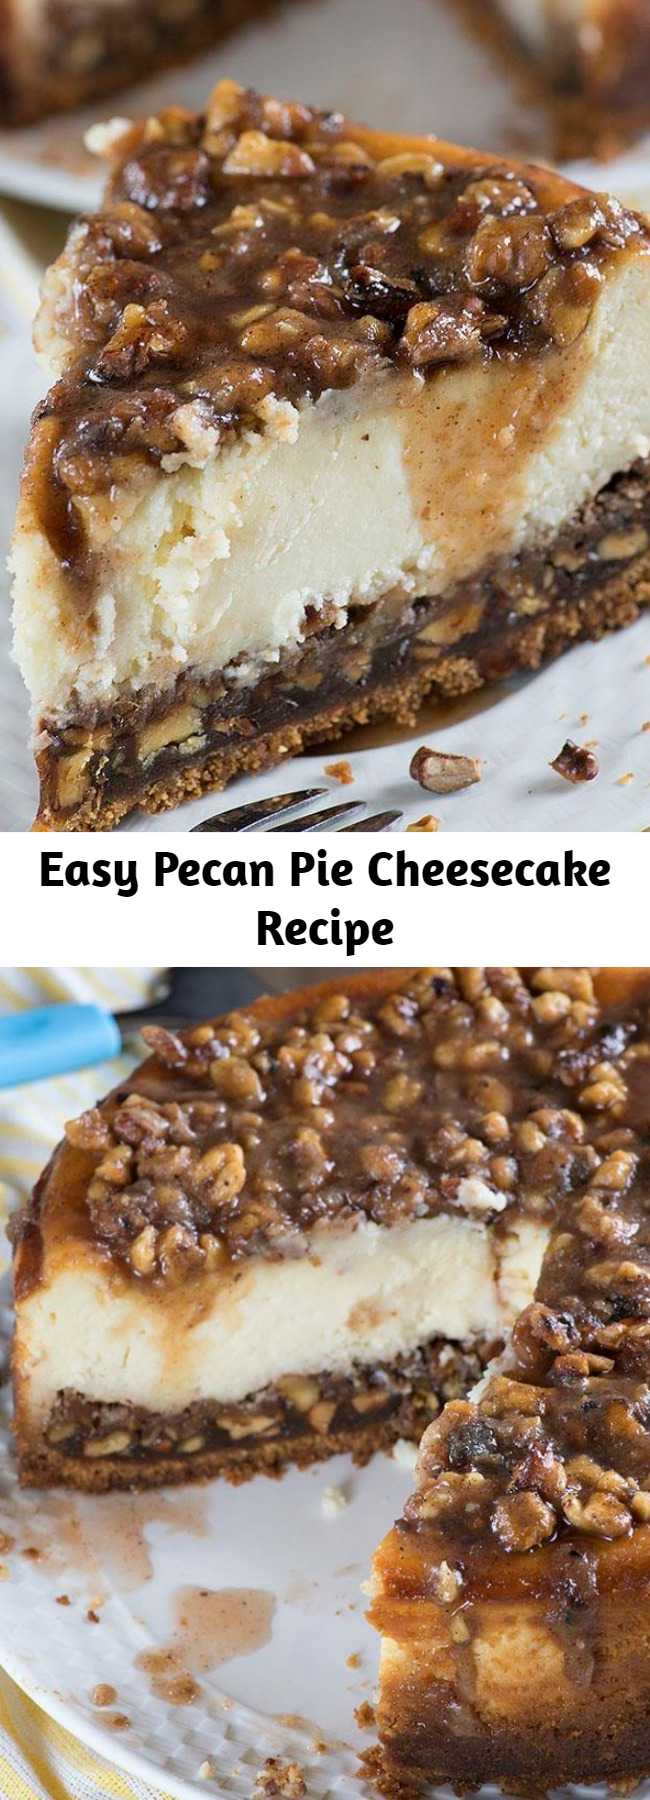 Easy Pecan Pie Cheesecake Recipe - This dreamy Pecan Pie Cheesecake is the perfect Thanksgiving treat. A combination of classic pecan pie and creamy cheesecake makes a tasty twist of two traditional treats!